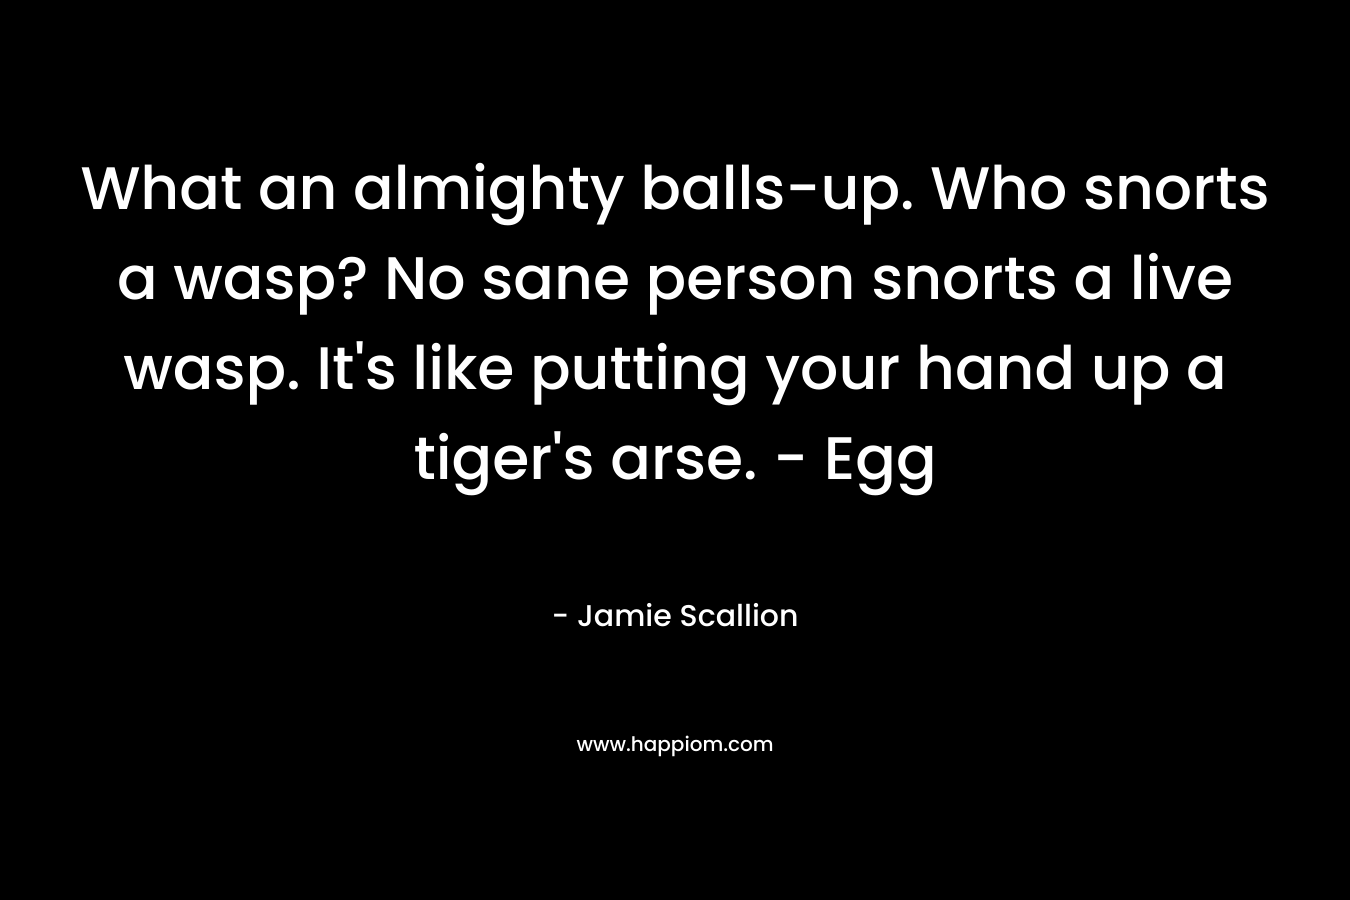 What an almighty balls-up. Who snorts a wasp? No sane person snorts a live wasp. It’s like putting your hand up a tiger’s arse. – Egg – Jamie Scallion